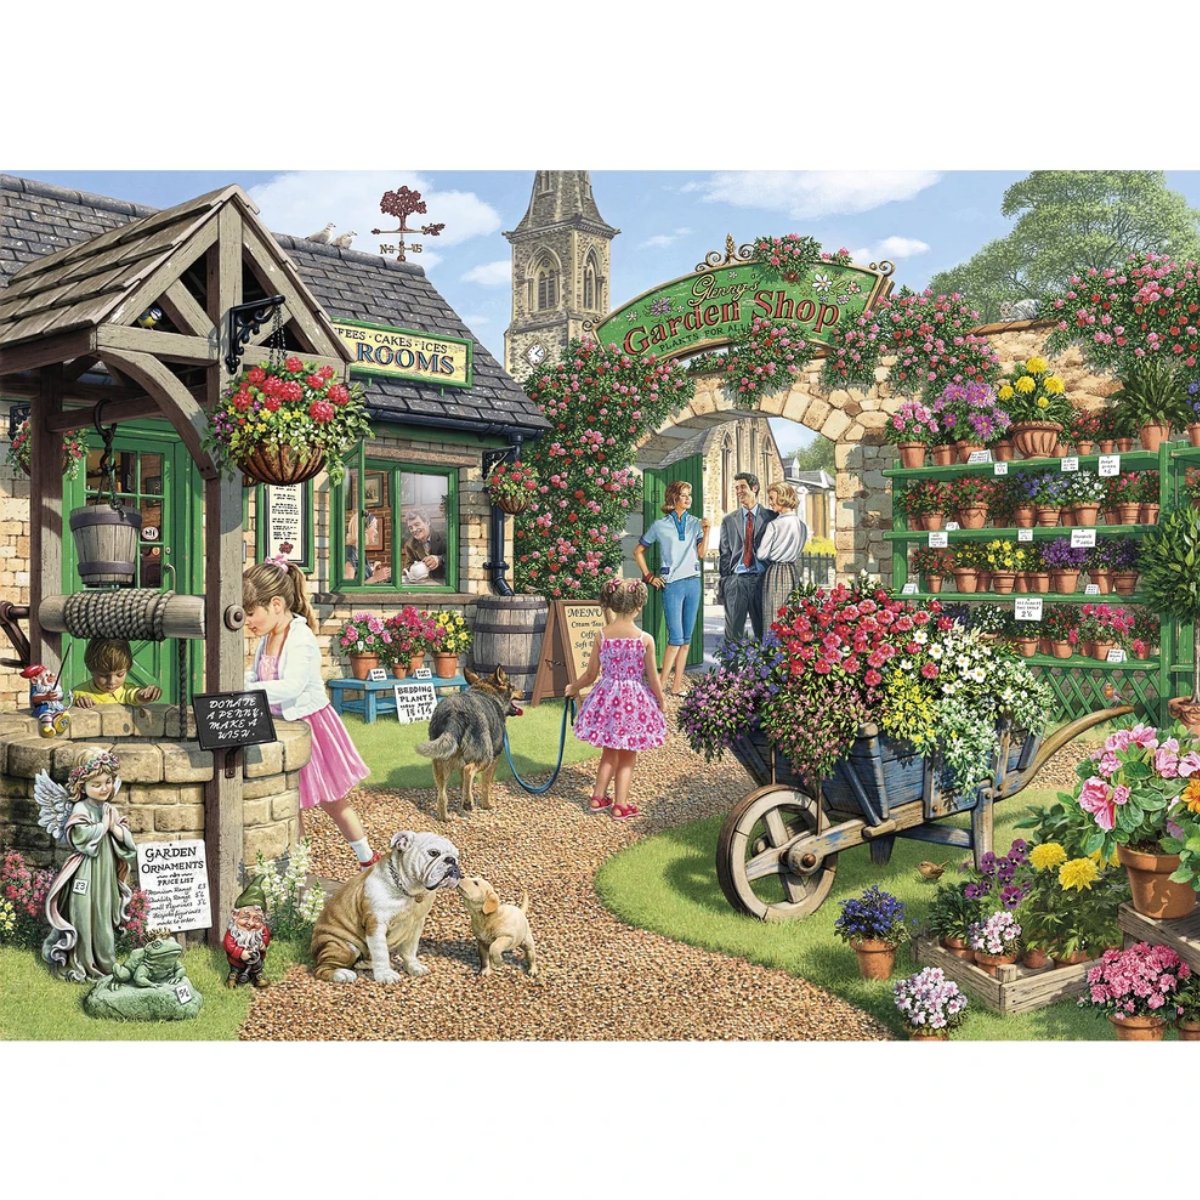 Gibsons Glenny's Garden Shop Jigsaw Puzzle (500 XL Pieces)